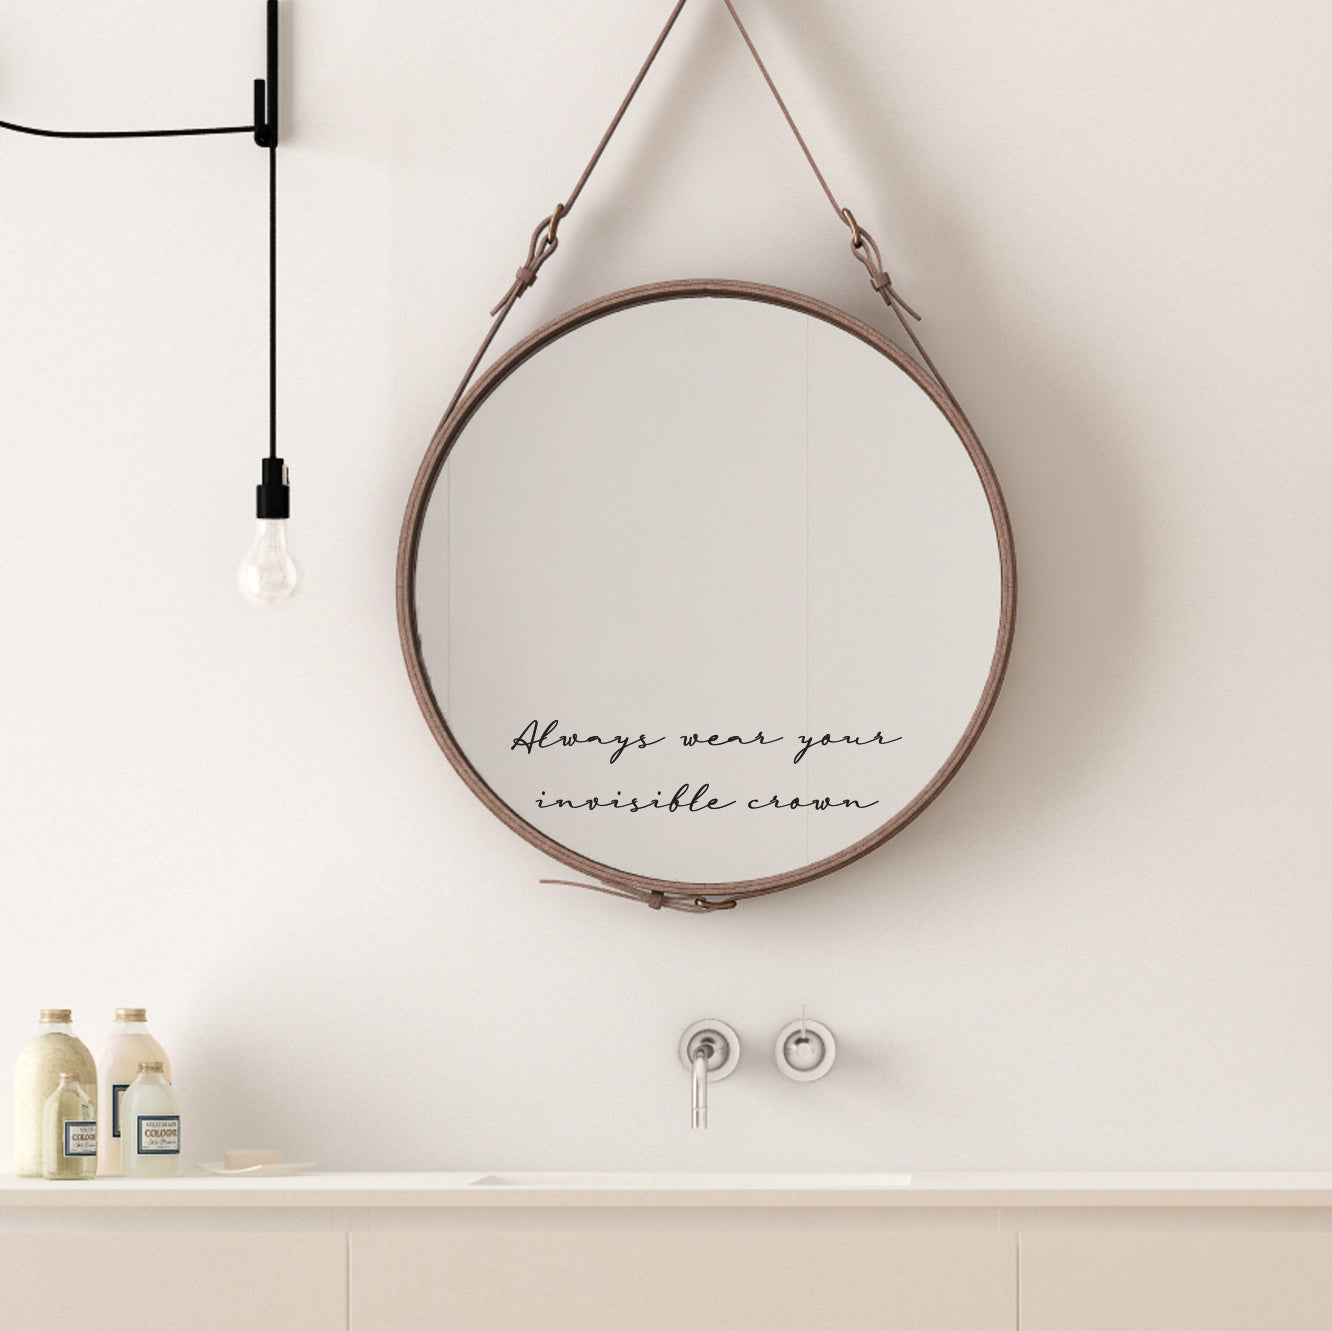 Always Wear Your invisible Crown mirror sticker. A black vinyl shown on a mirror in a script style font. A decoration for a bathroom or bedroom.